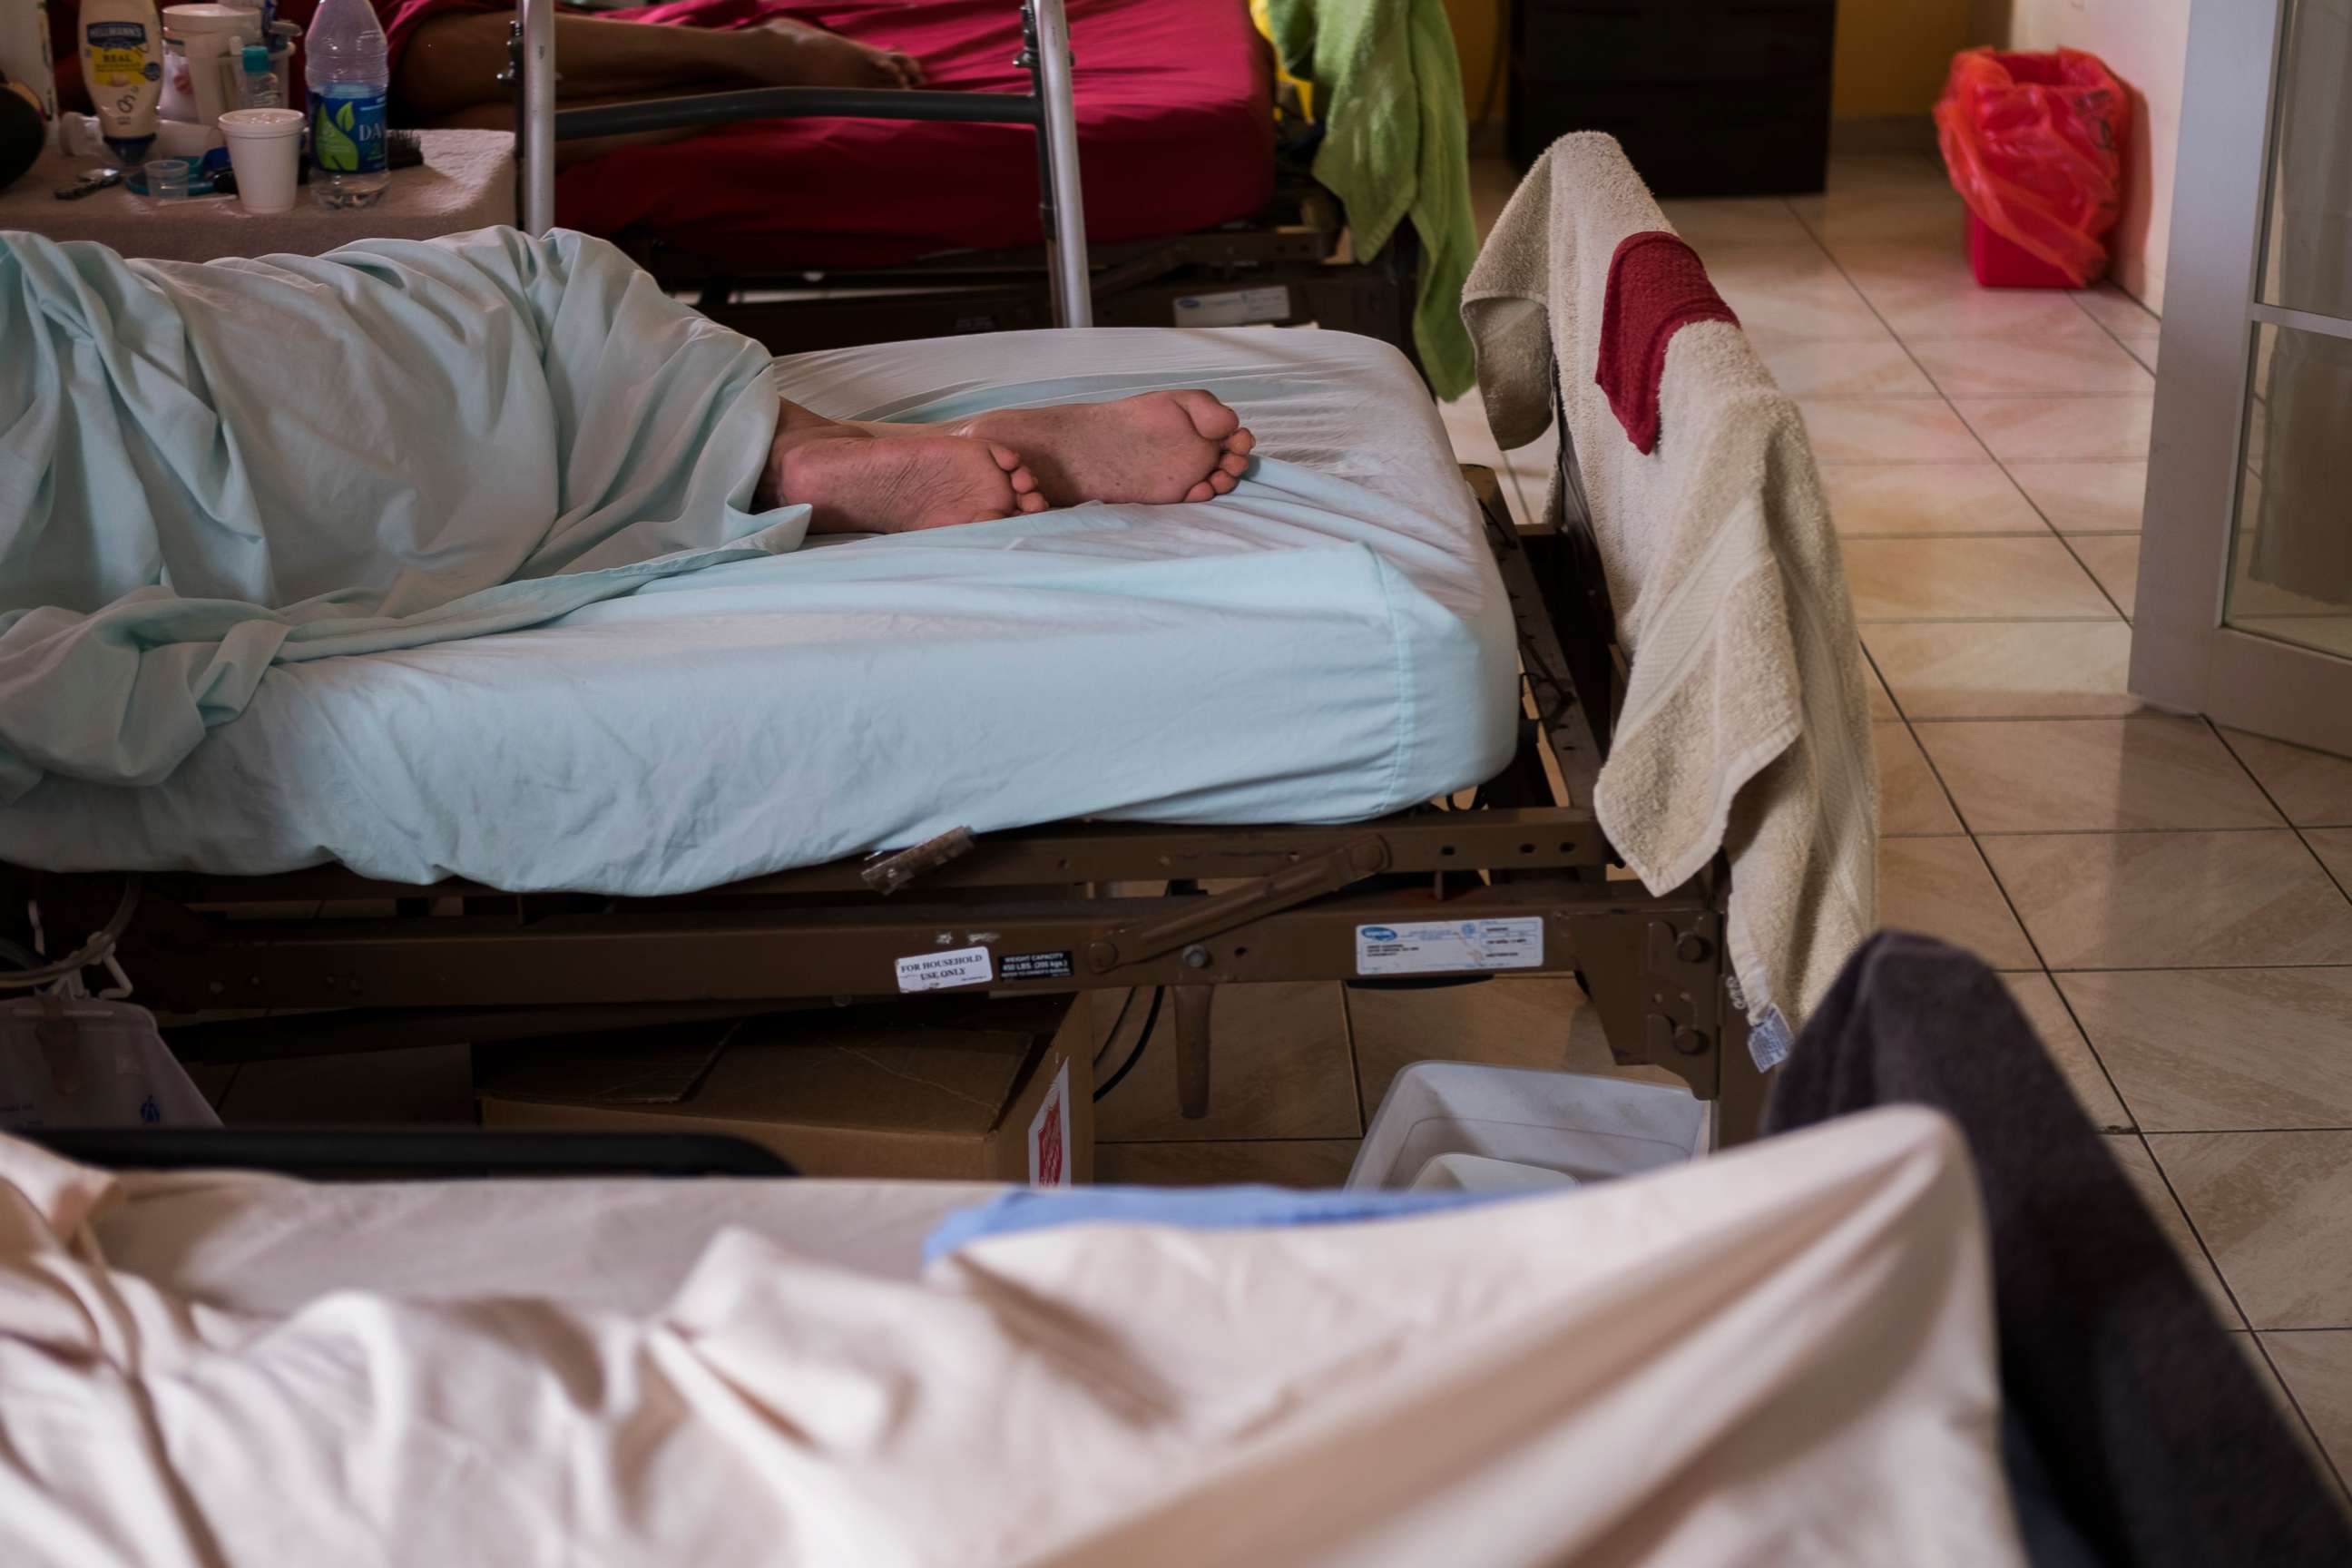 PHOTO: Patients lie in beds at a non profit HIV clinic in Toa Baja, Puerto Rico, March 20, 2019.